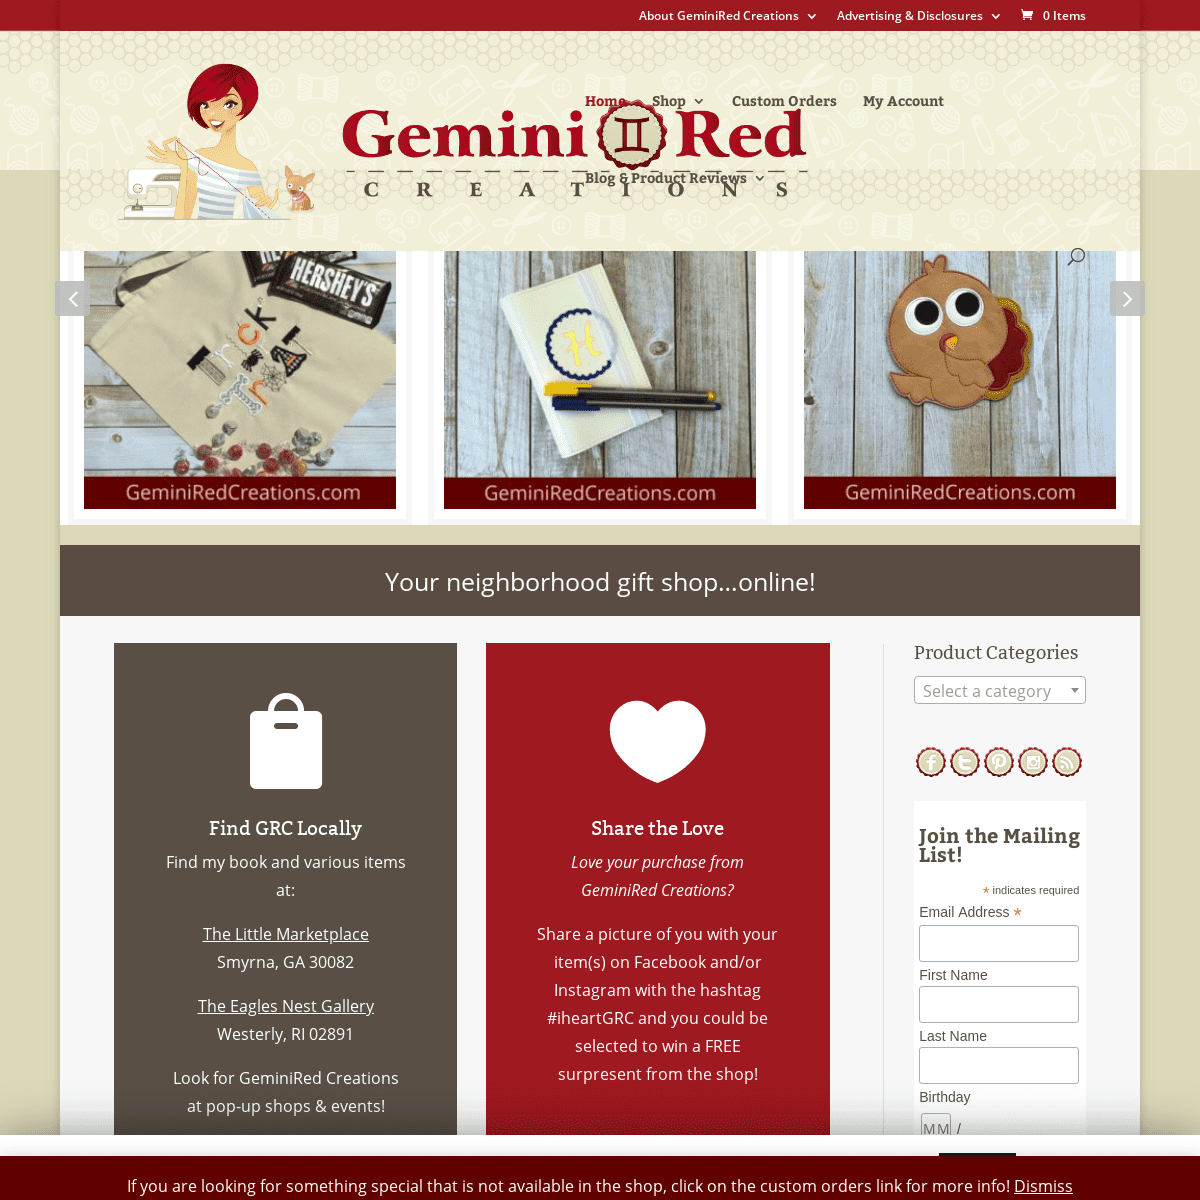 A complete backup of geminiredcreations.com